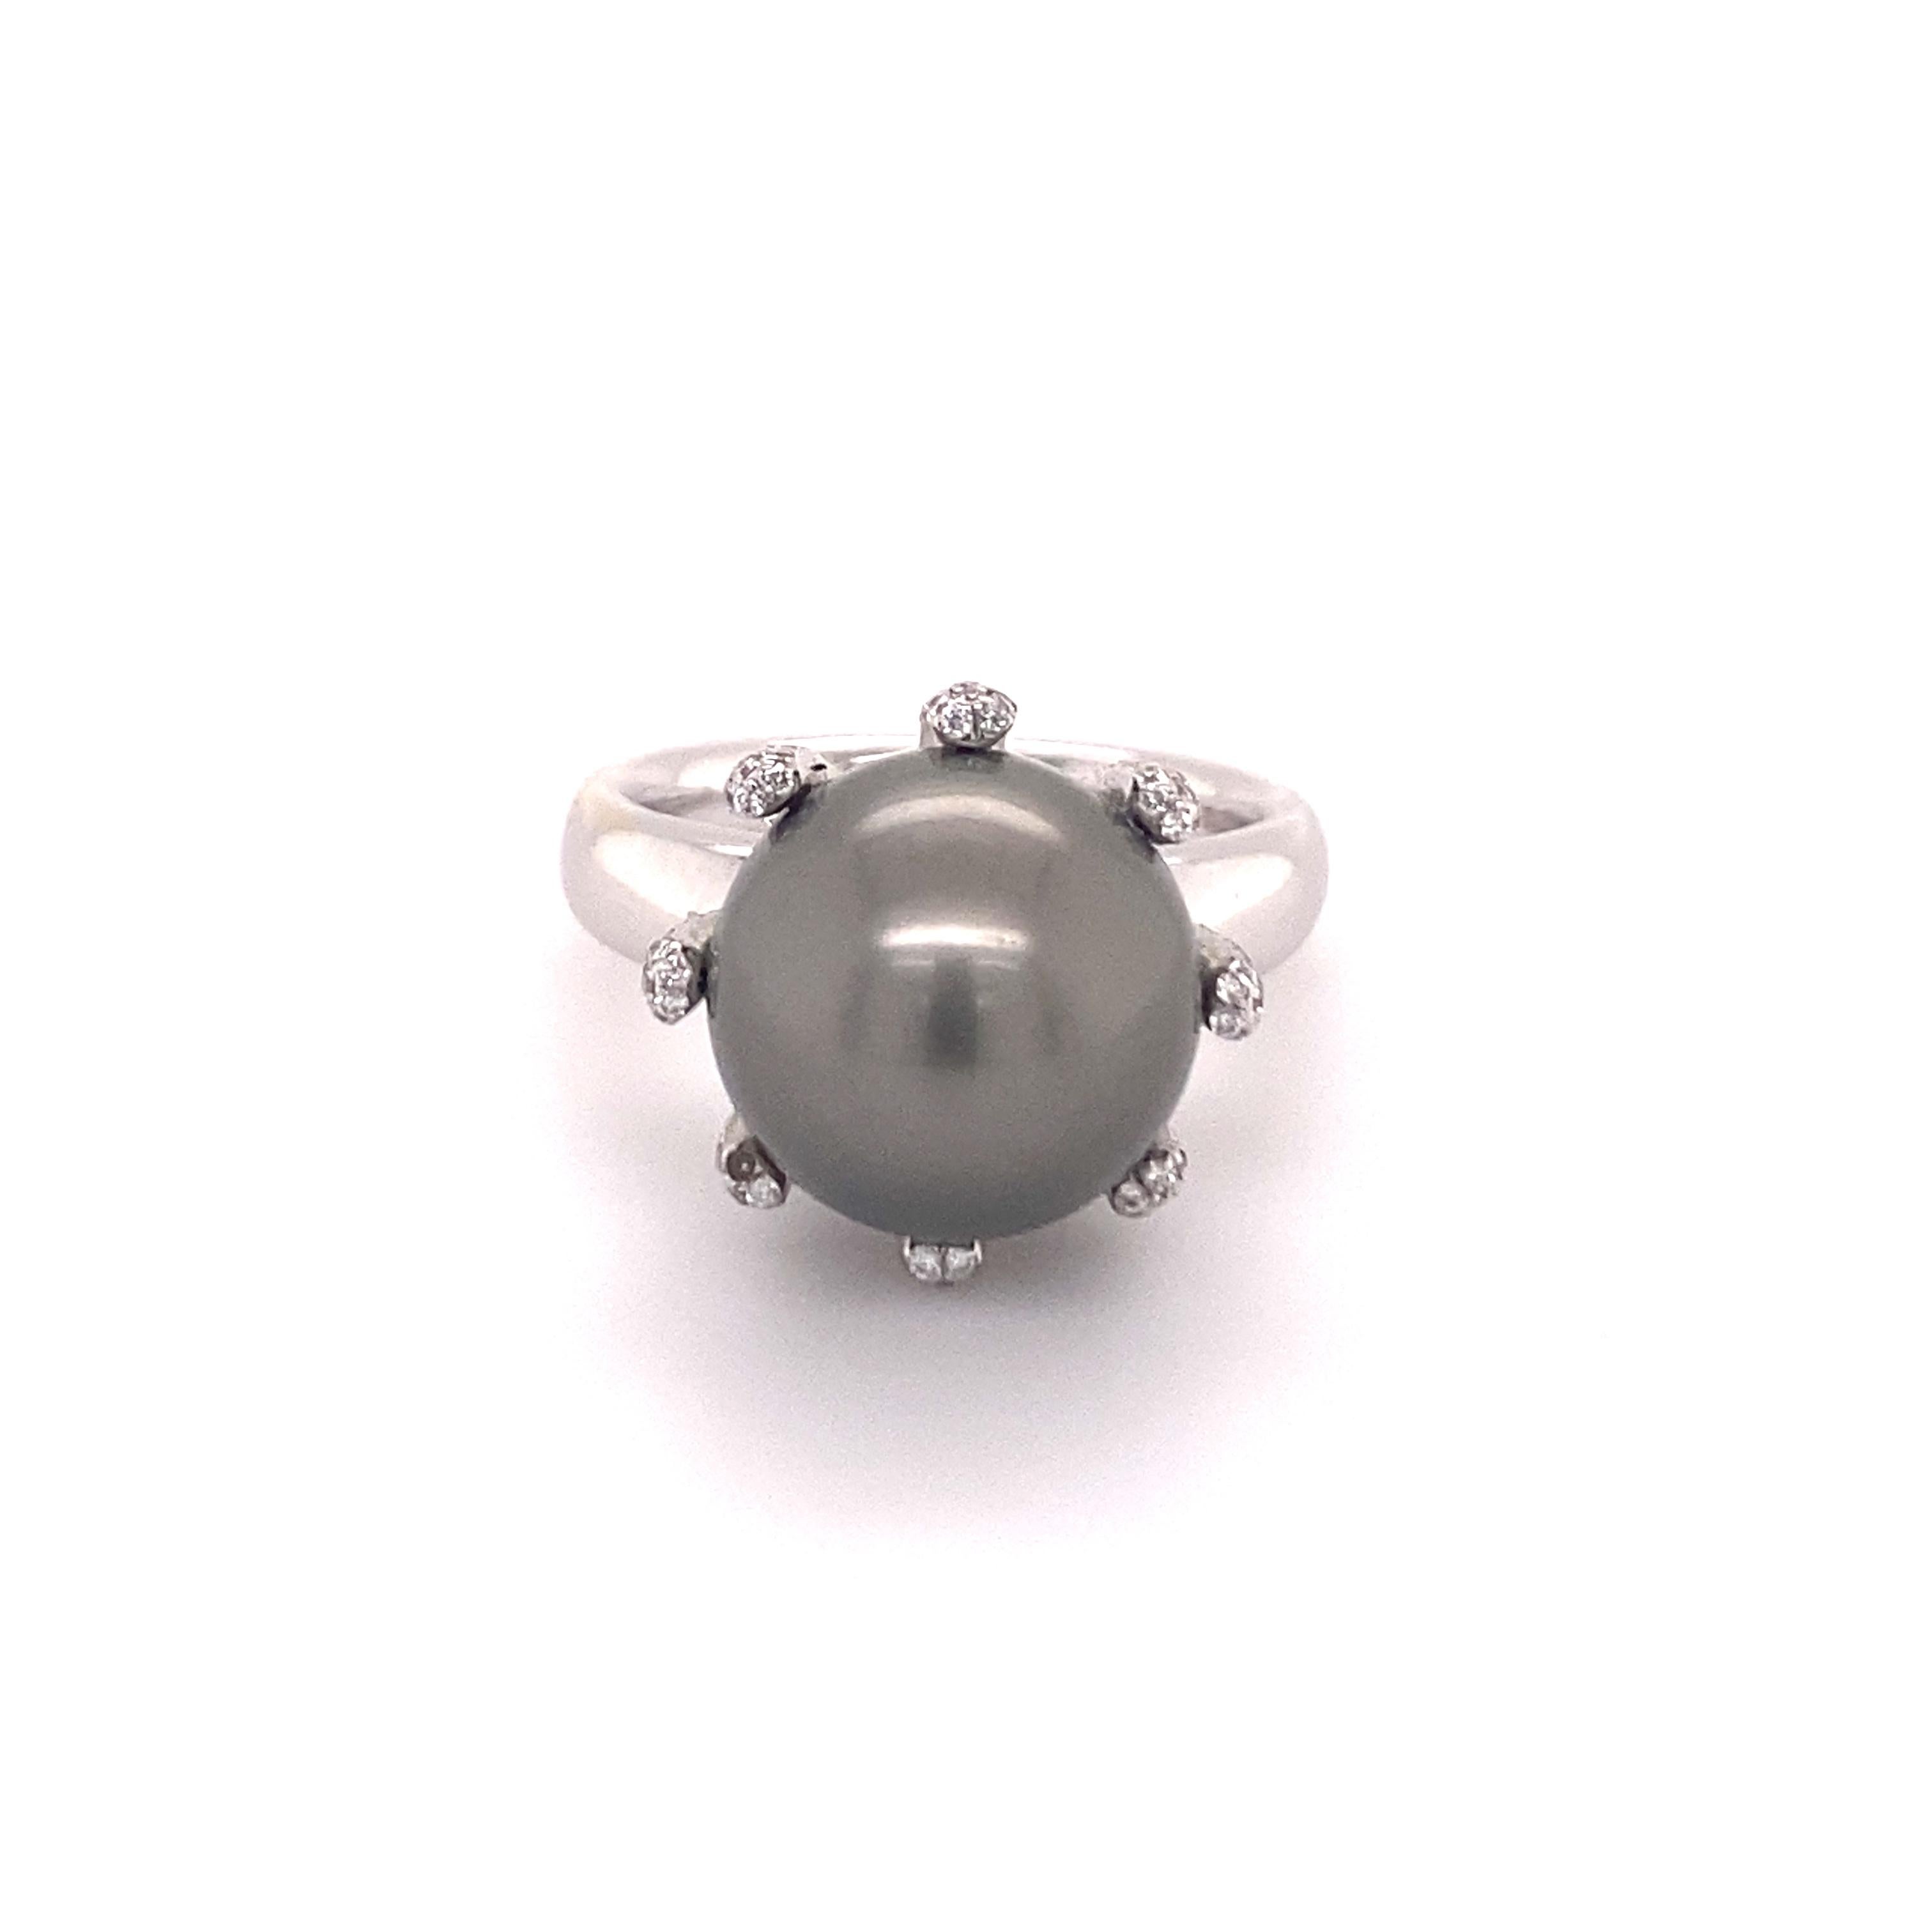 Gorgeous ring manufactured in 18 karat white gold centering one Tahitian Cultured Pearl of 12.0 mm in diameter. The pearl is of perfectly round shape with a medium dark-gray bodycolor. The surface shows minor blemishes combined with a very good